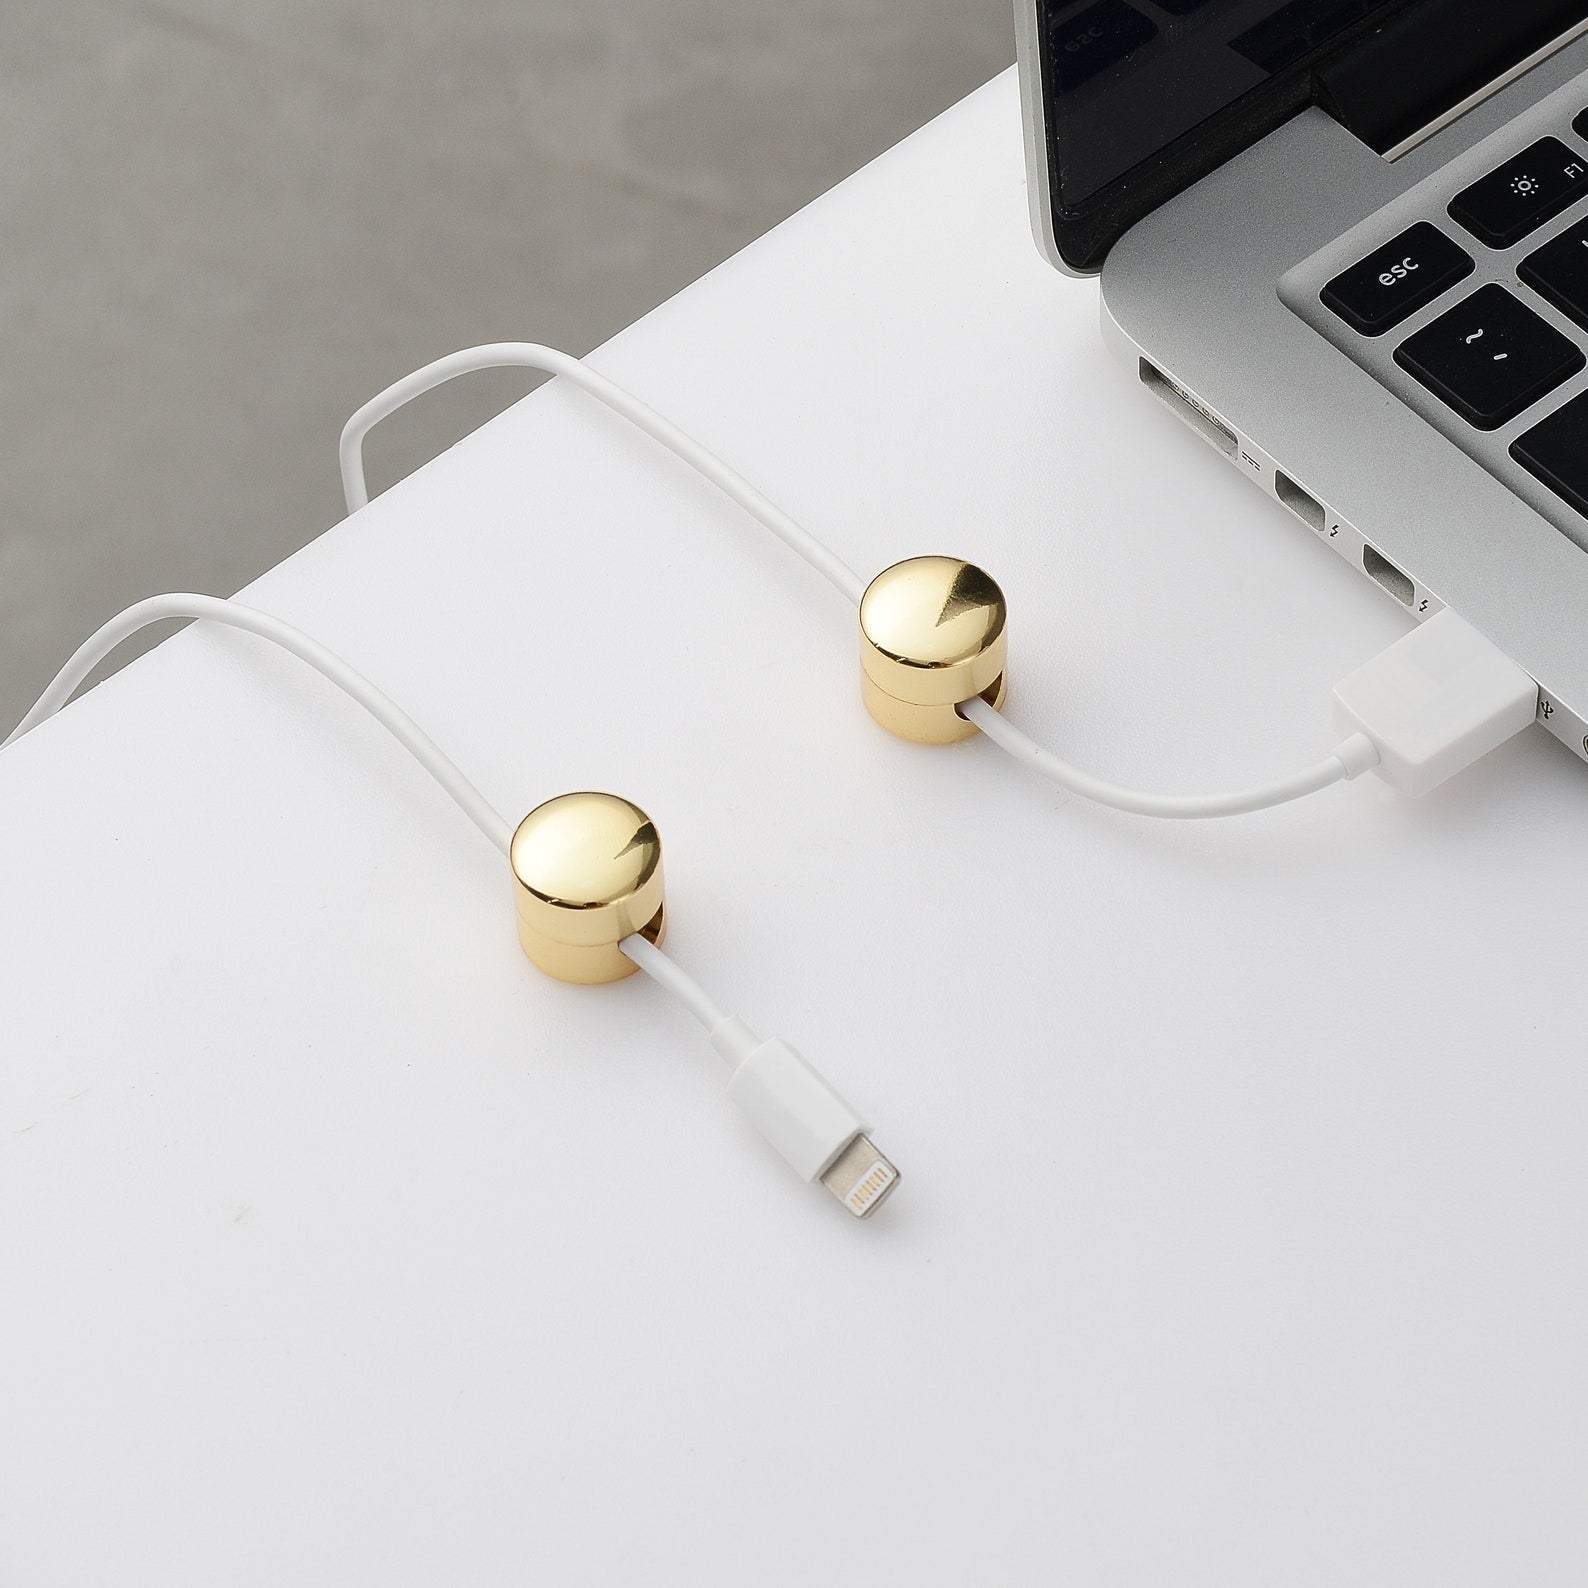 gold-tone cable clip organizers clamped around Apple chargers on desk